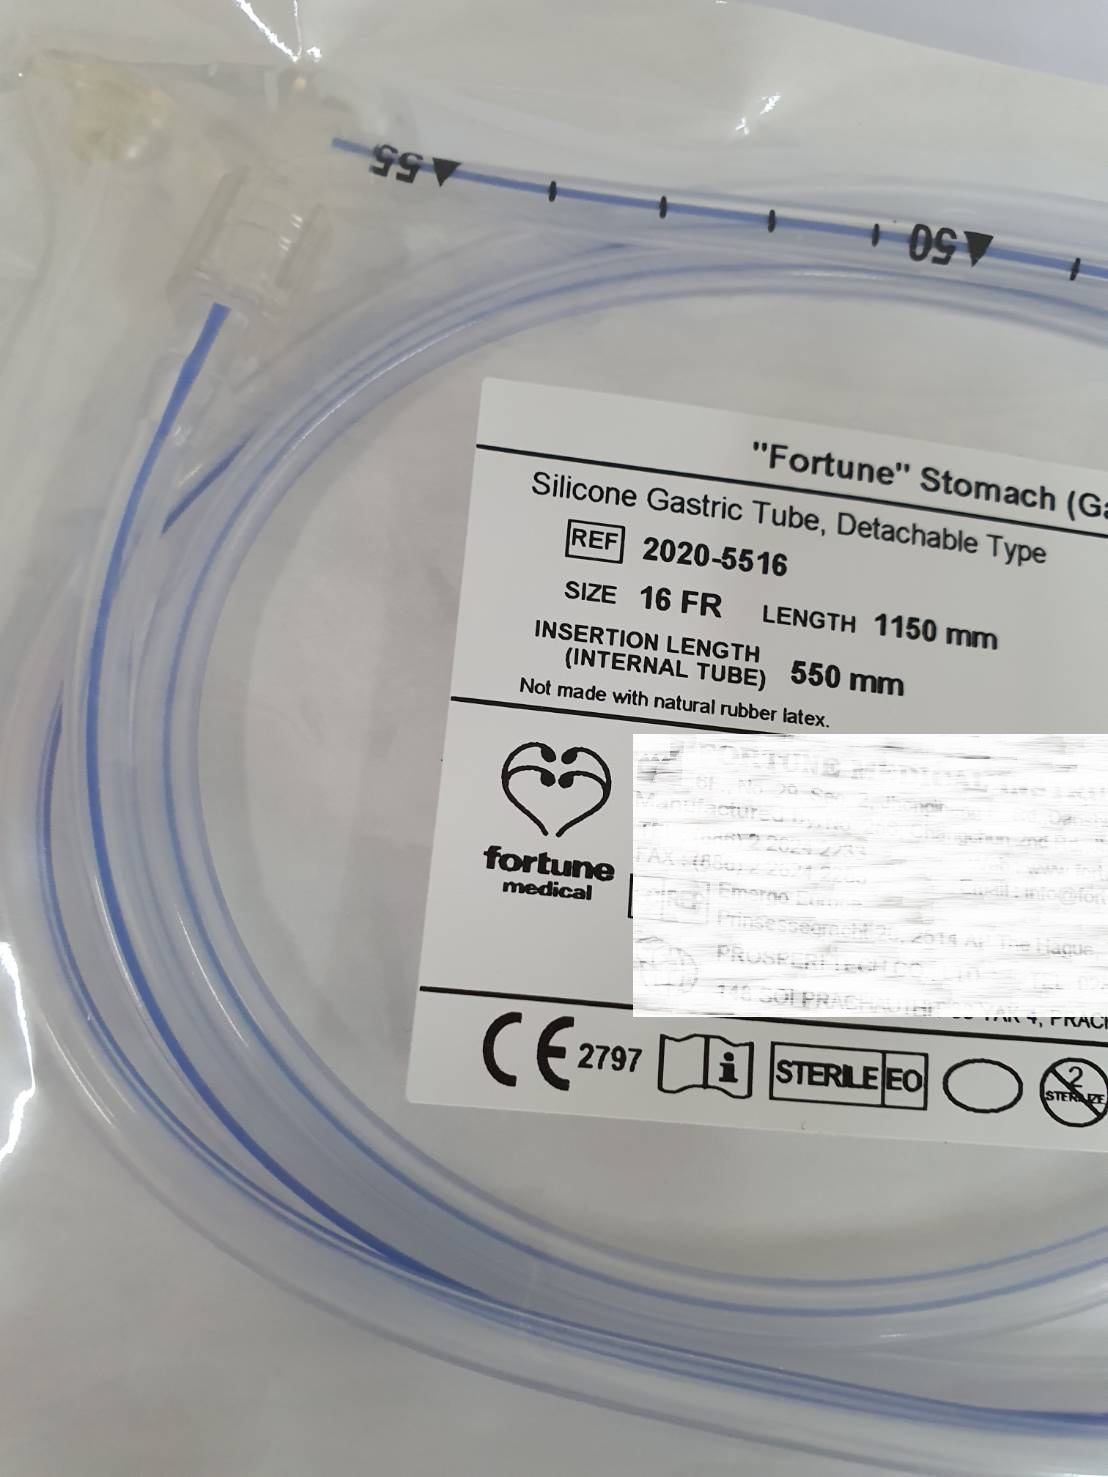 Silicone Gastric Tube, Detachable Type - Fortune Medical Instrument Corp.